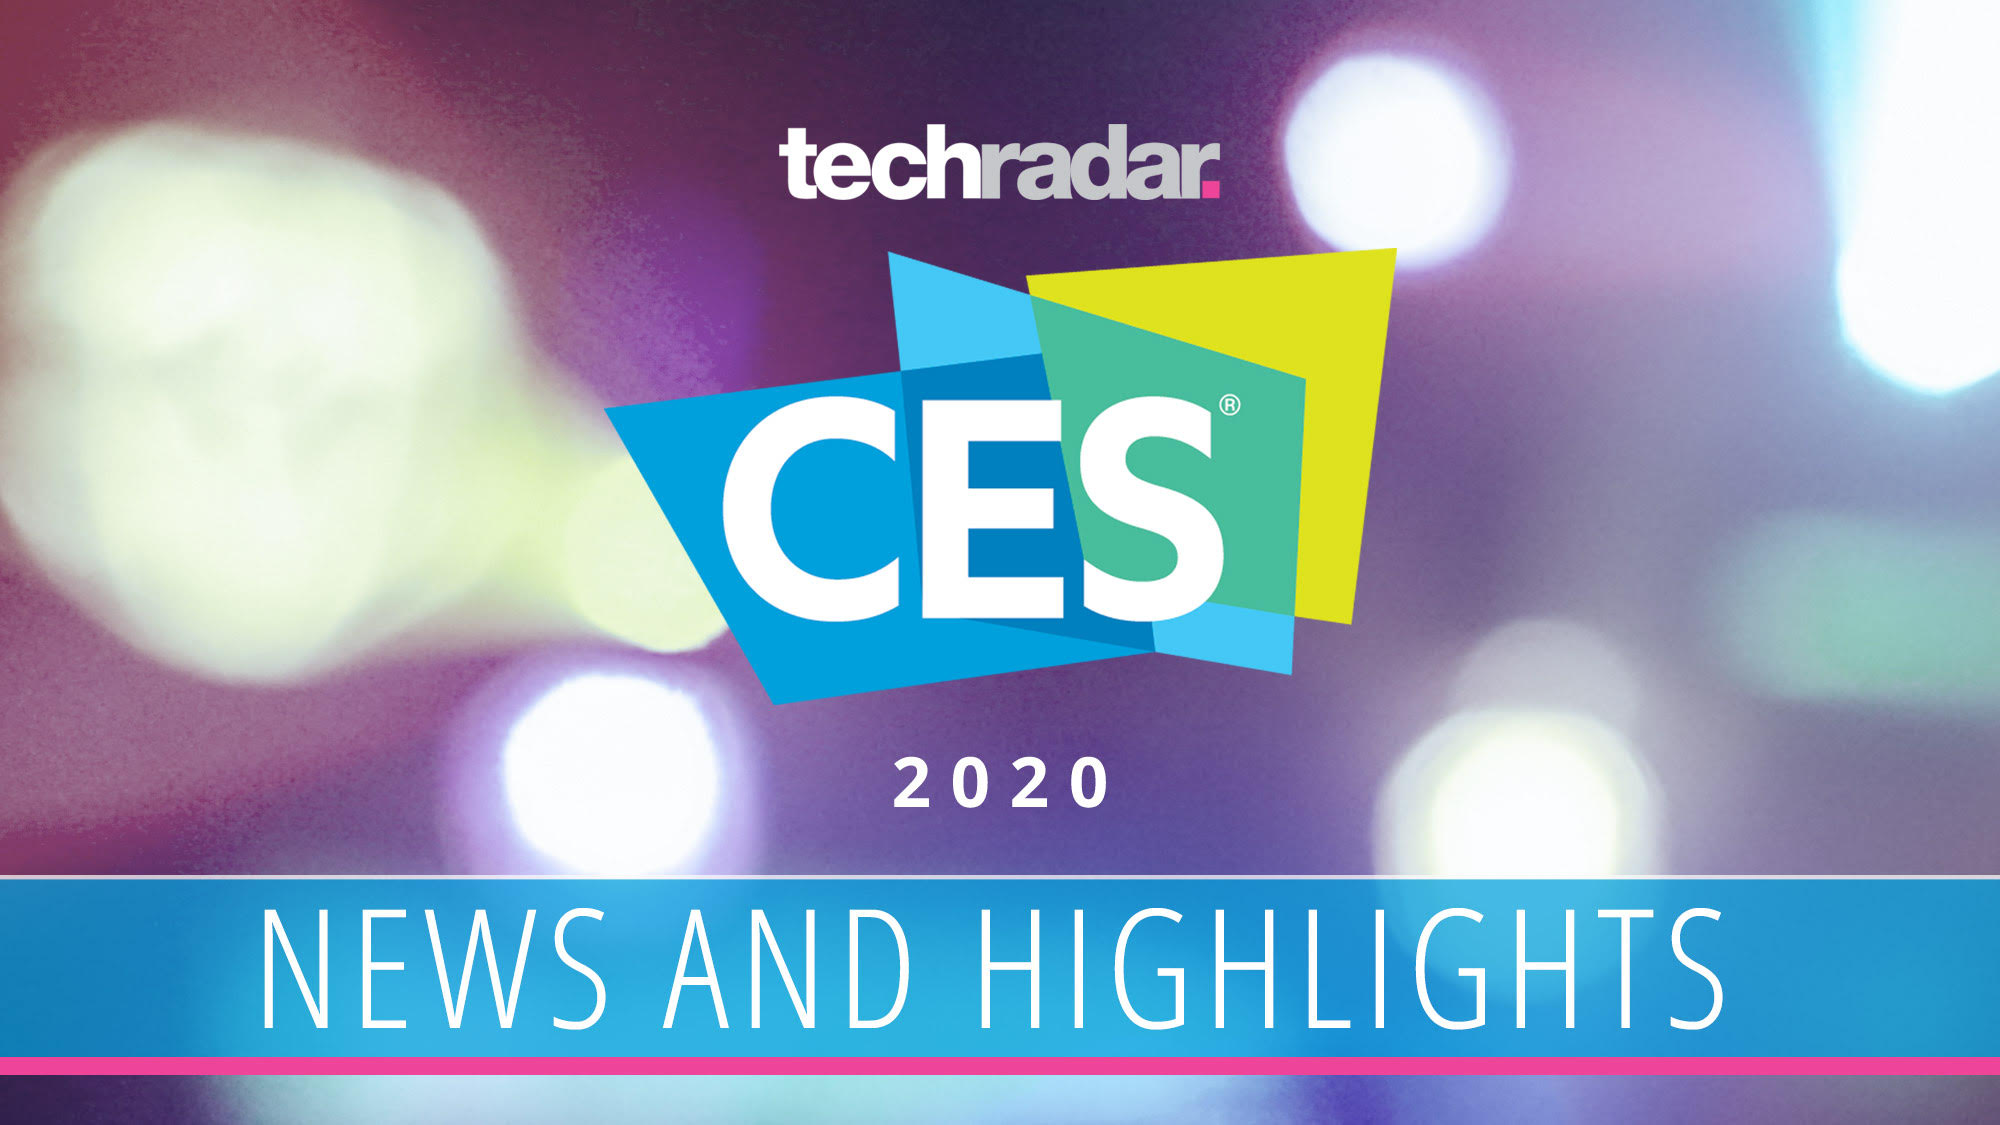 CES 2020 highlights, video and news of the most exciting new tech